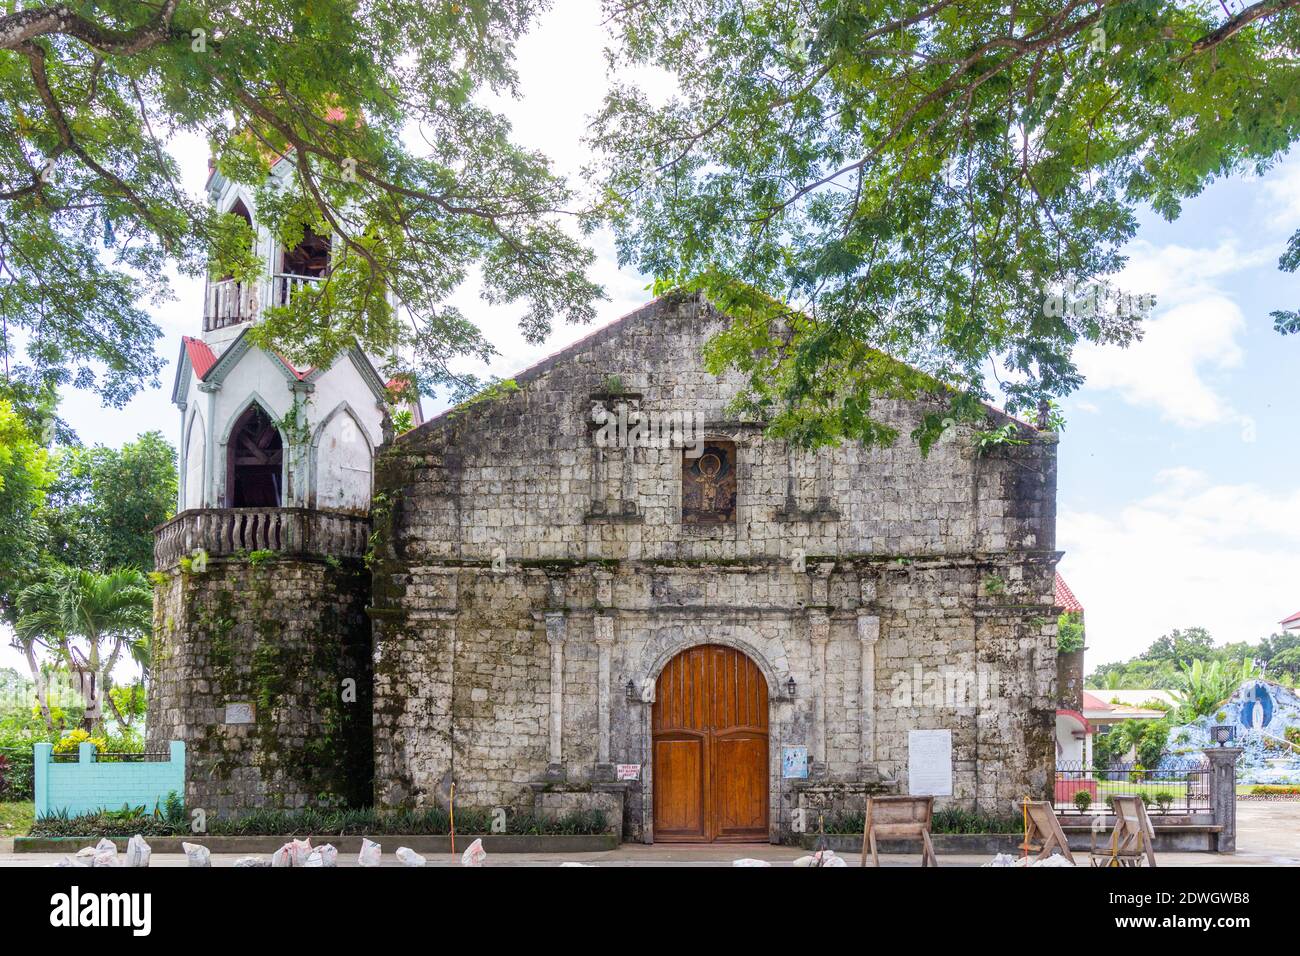 Th facade of the old Malitbog Church in Southern Leyte, Philippines Stock Photo